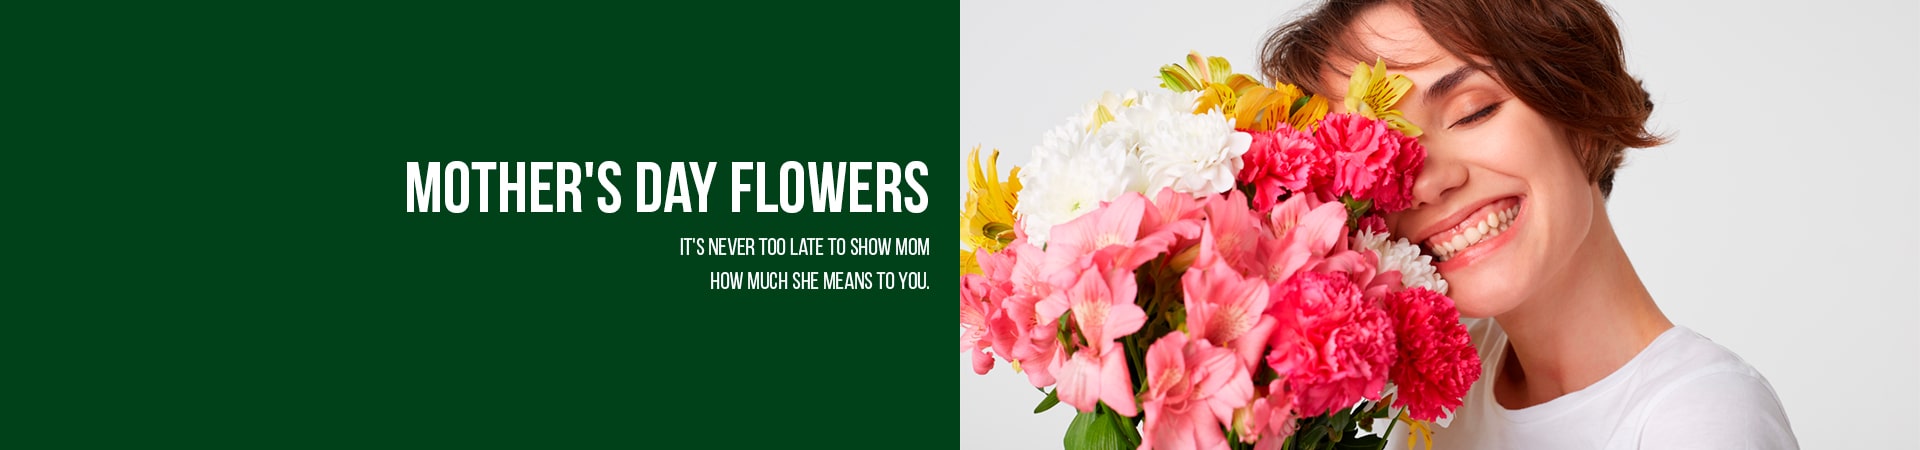 Flowers and special arrangements for mom on her day, send bouquets with roses and chocolates on her birthday or on the special celebration day, mother's day, we personally deliver your flowers to your home.